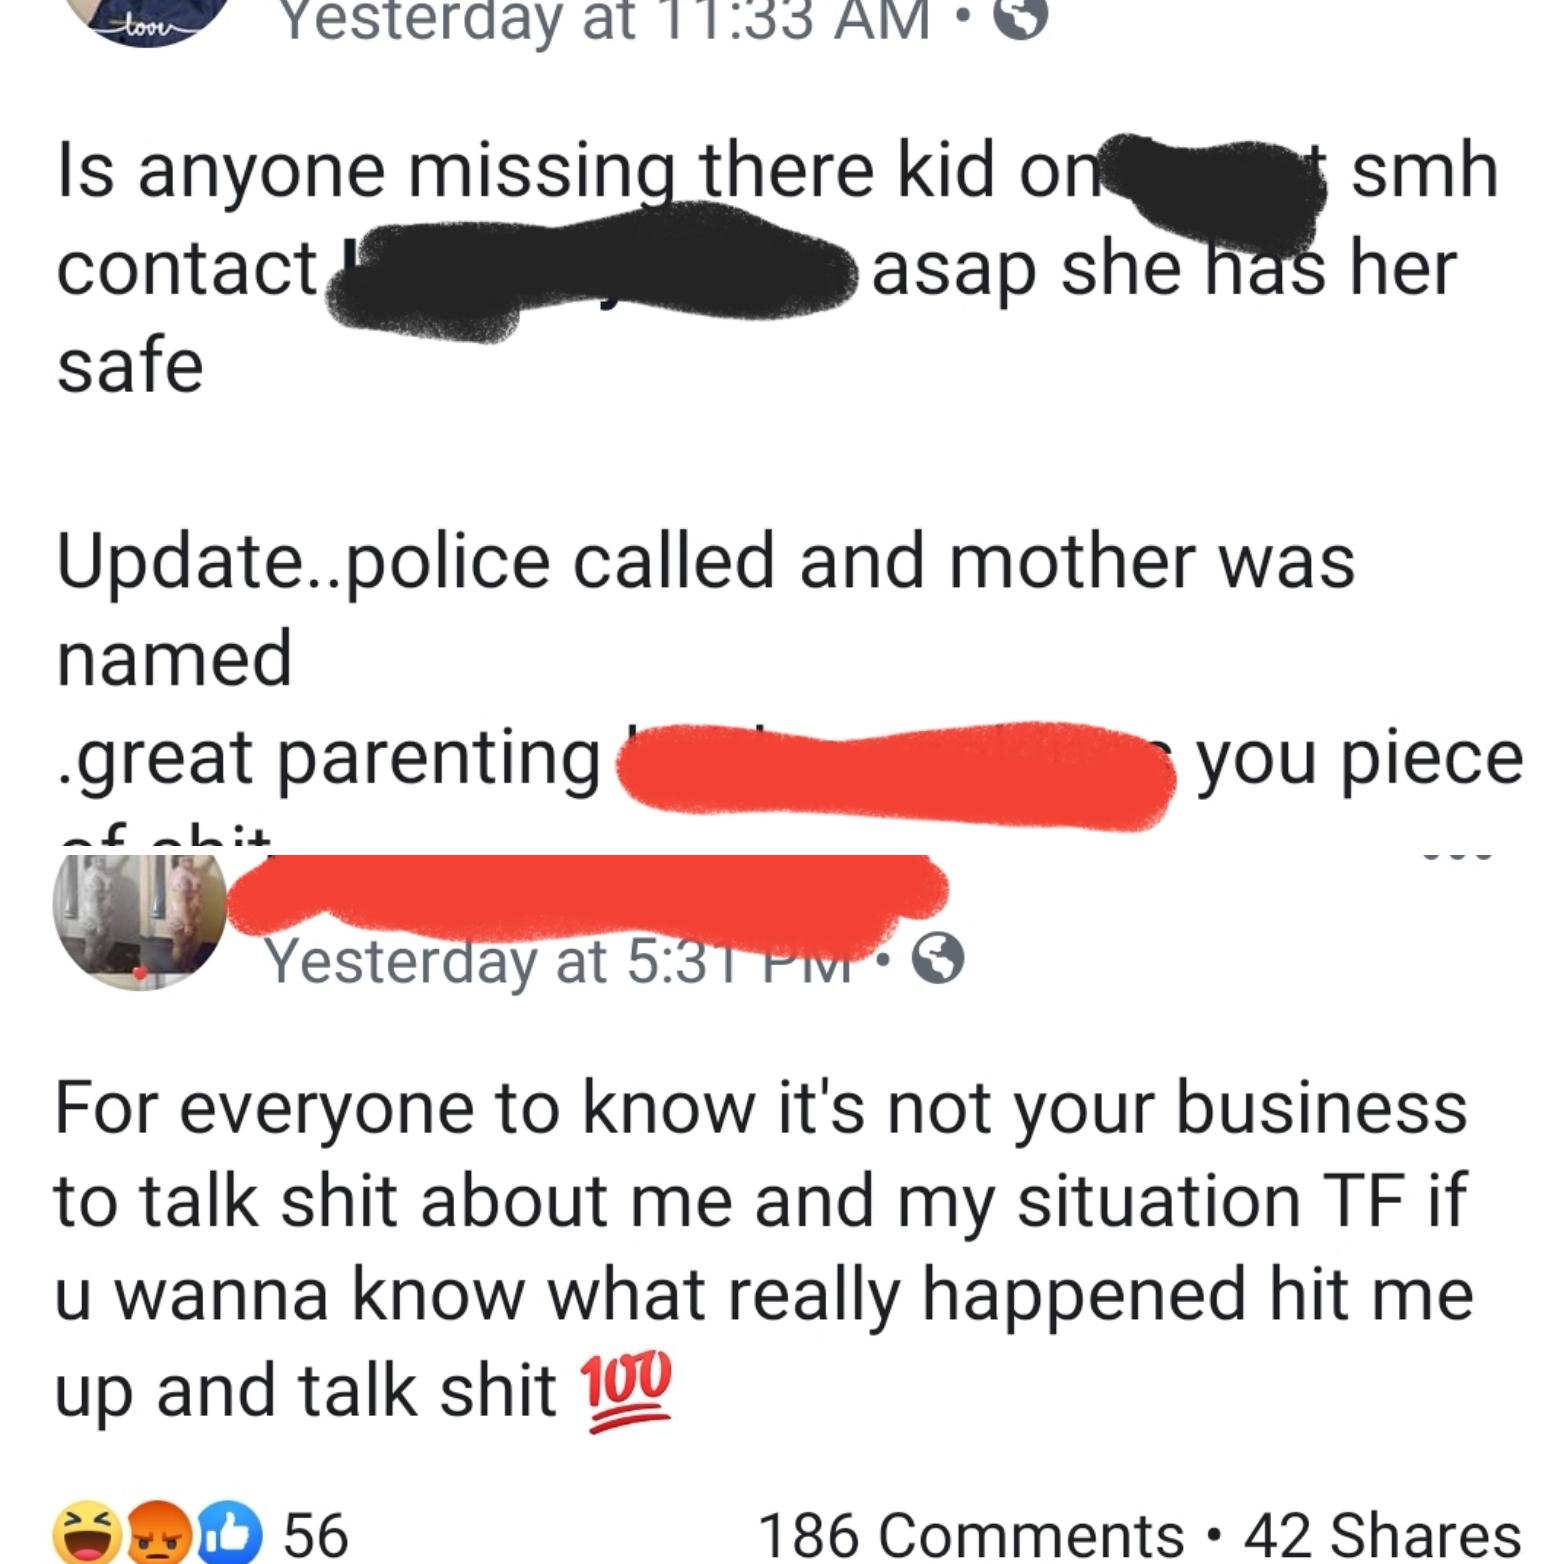 loot on Yesterday at 0 Is anyone missing there kid on smh contact asap she has her safe Update..police called and mother was named .great parenting you piece Yesterday at For everyone to know it's not your business to talk shit about me and my situation T